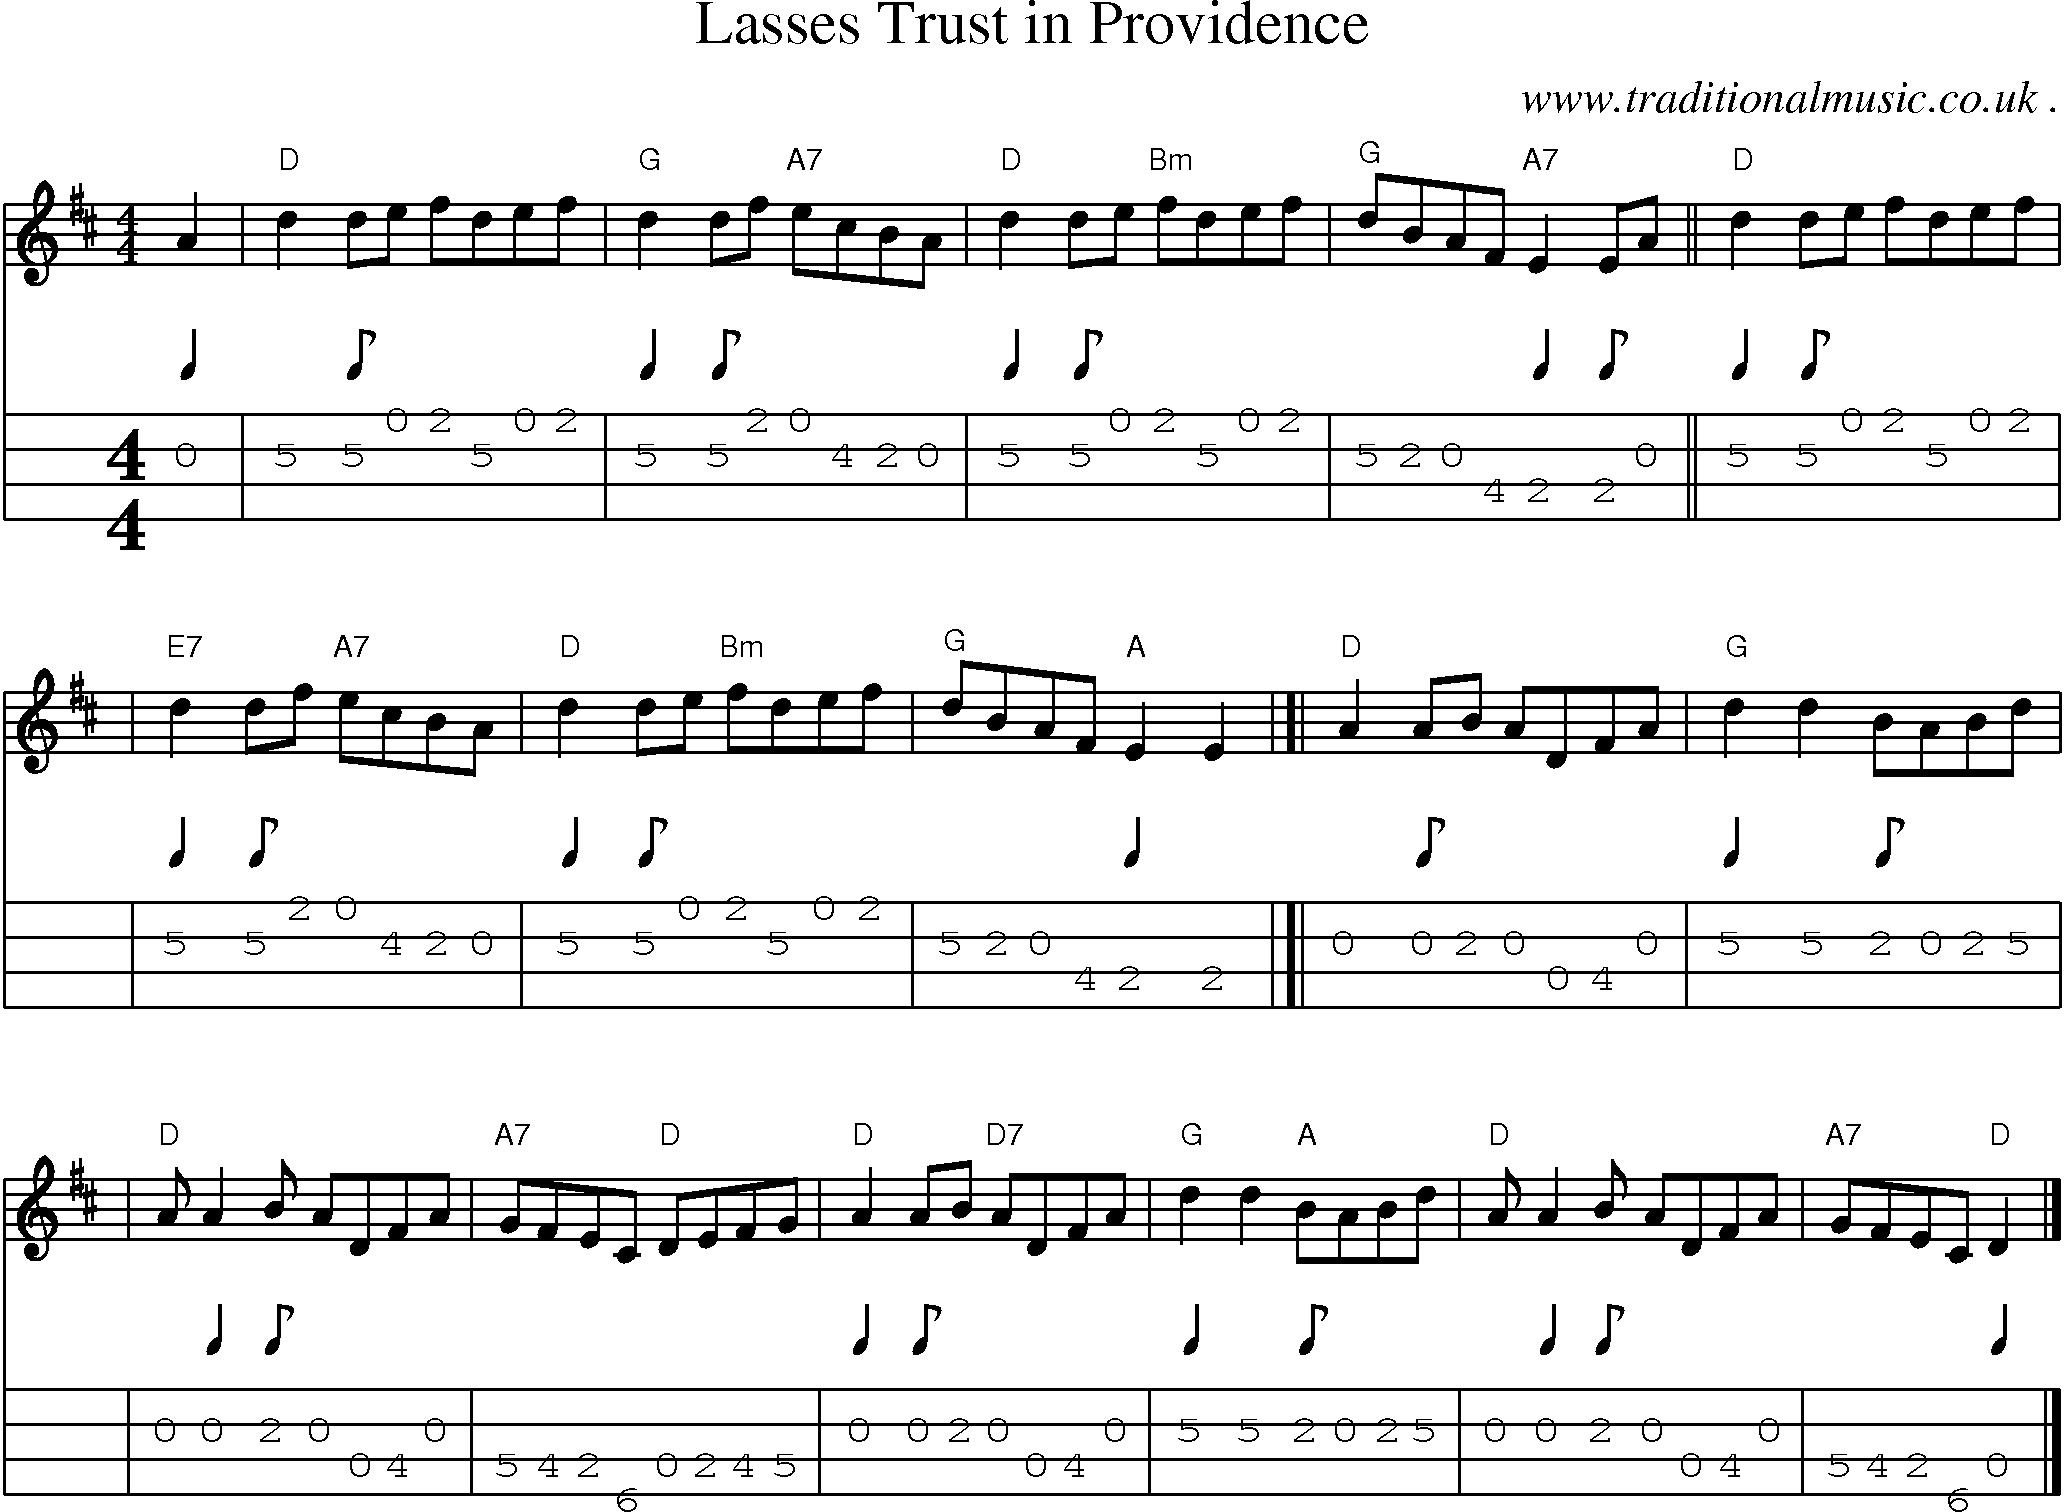 Sheet-music  score, Chords and Mandolin Tabs for Lasses Trust In Providence